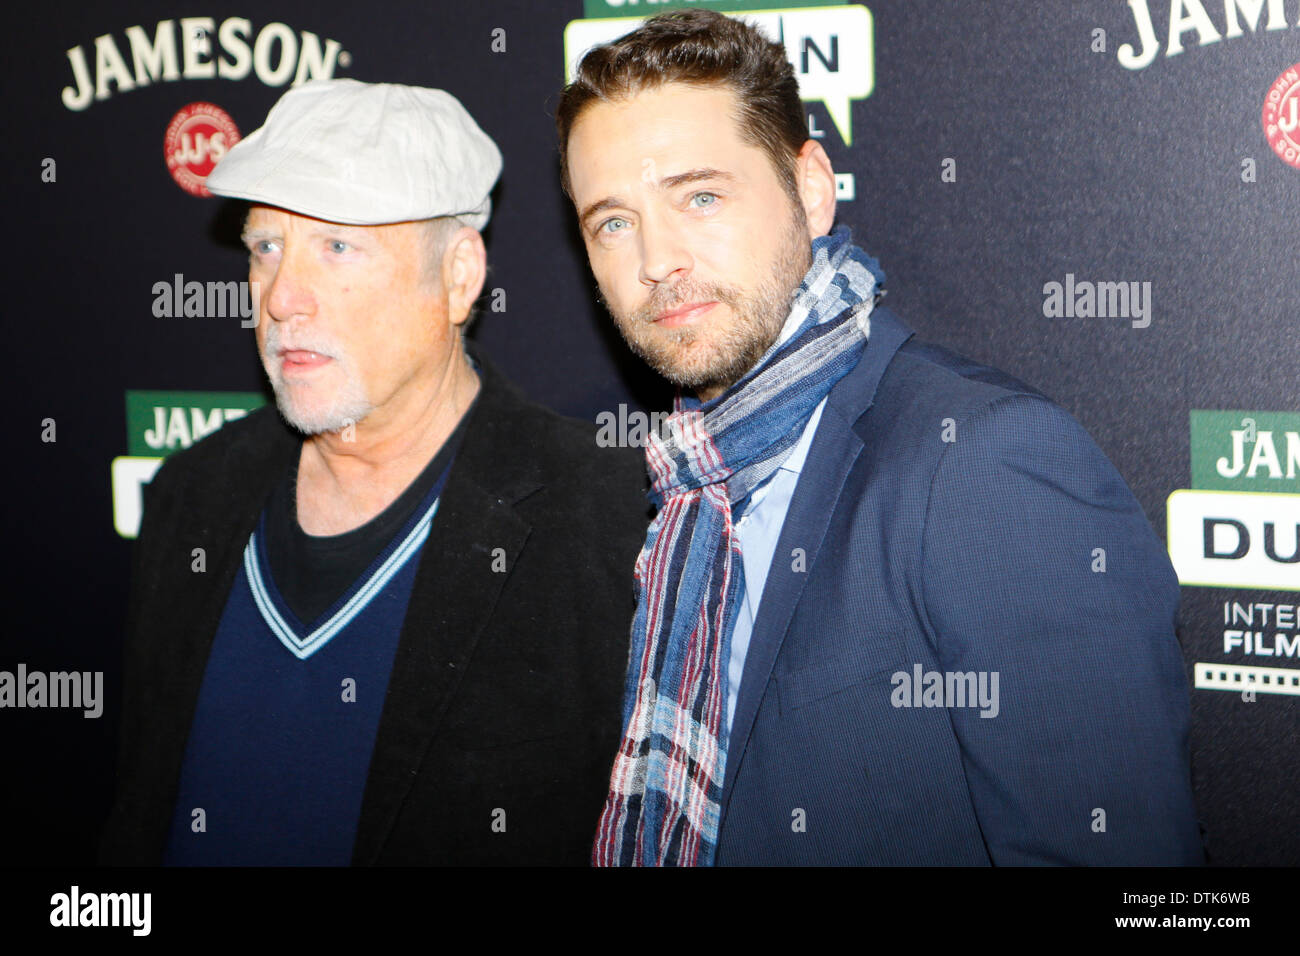 Dublin, Ireland. 19th February 2014. Cast member Richard Dreyfuss and  Director Jason Priestley pose for the cameras from left to right at the  photo call for 'Cas & Dylan'. Director Jason Priestley,